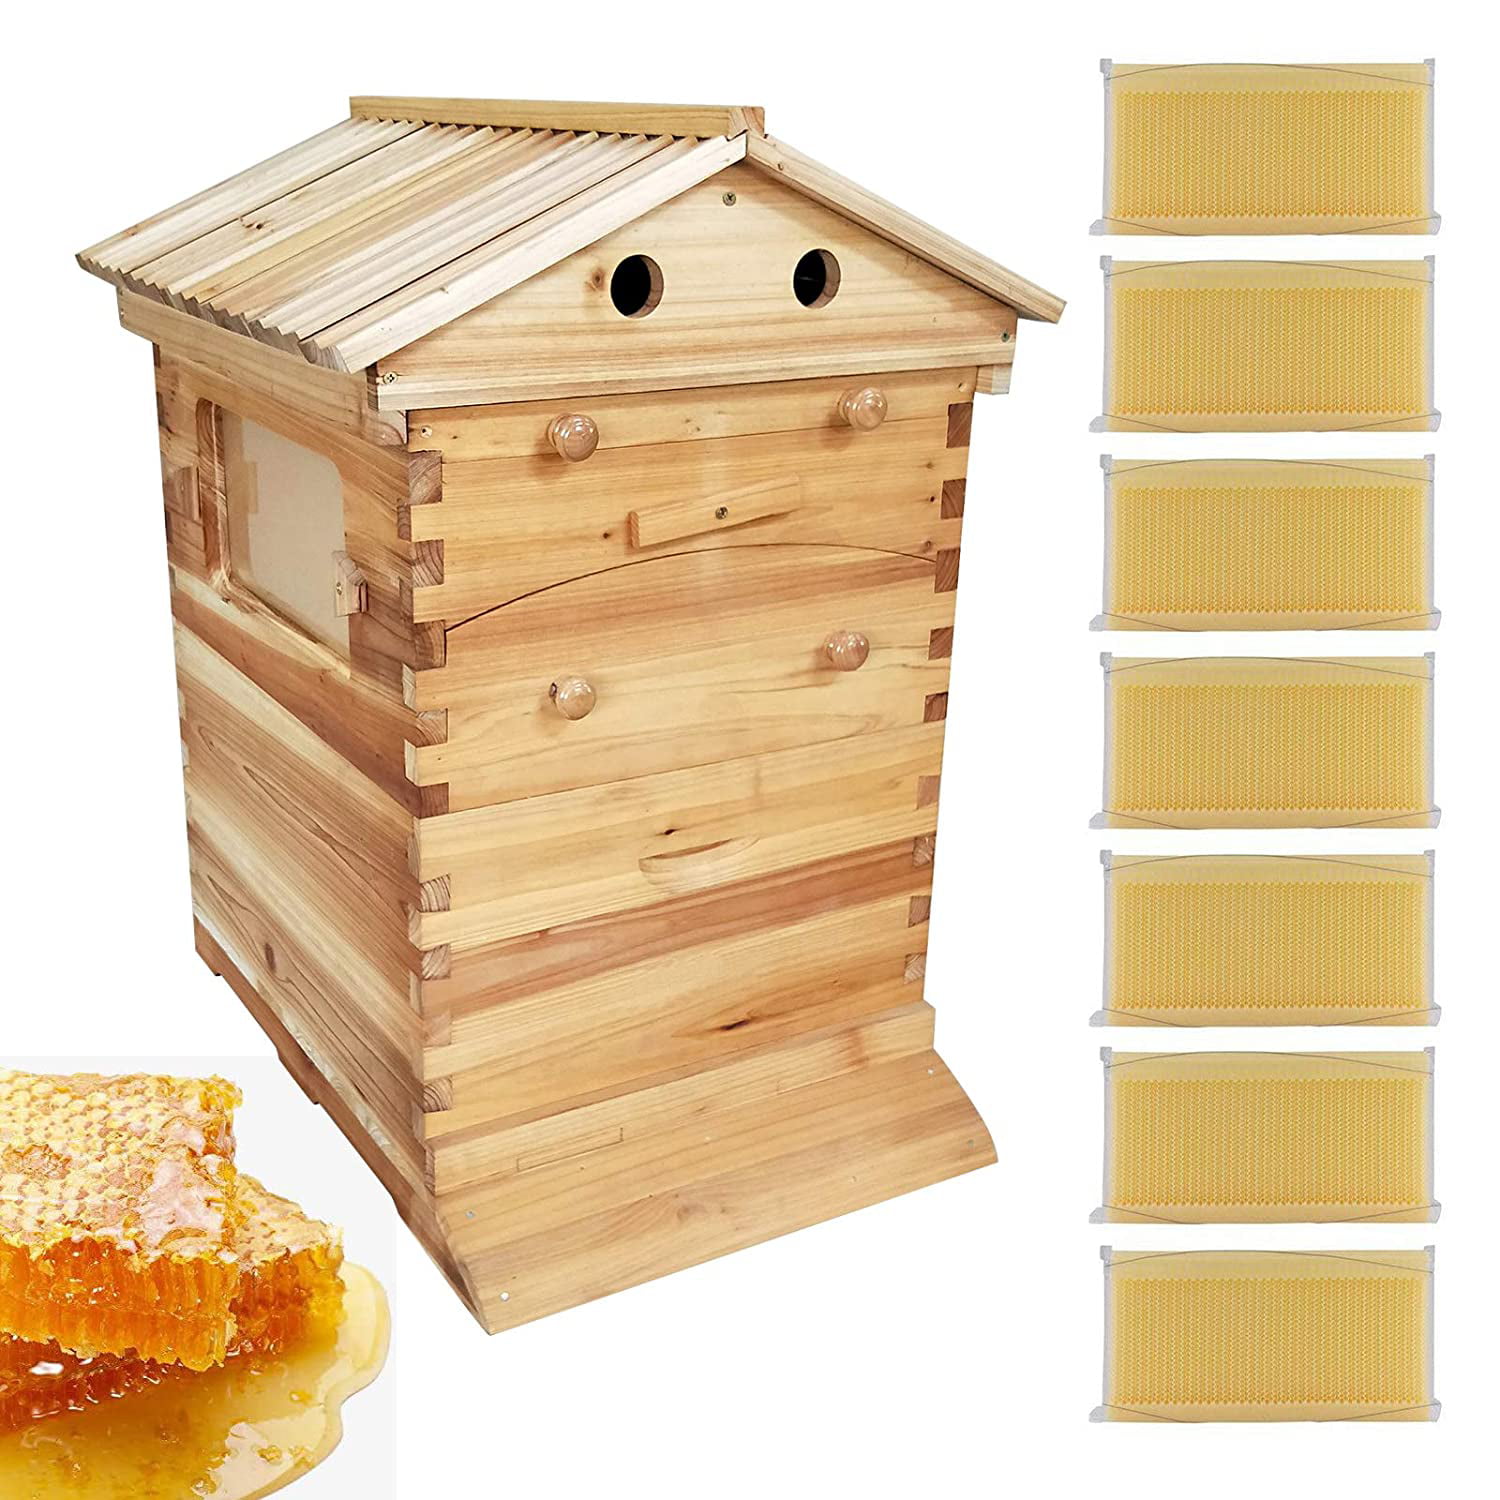 OUKANING 7Pcs Auto Honey Beekeeping Beehive Raw Bee Comb Hive Frames Harvesting Honey Hive Beehive Beehive Frames Collection Tools 